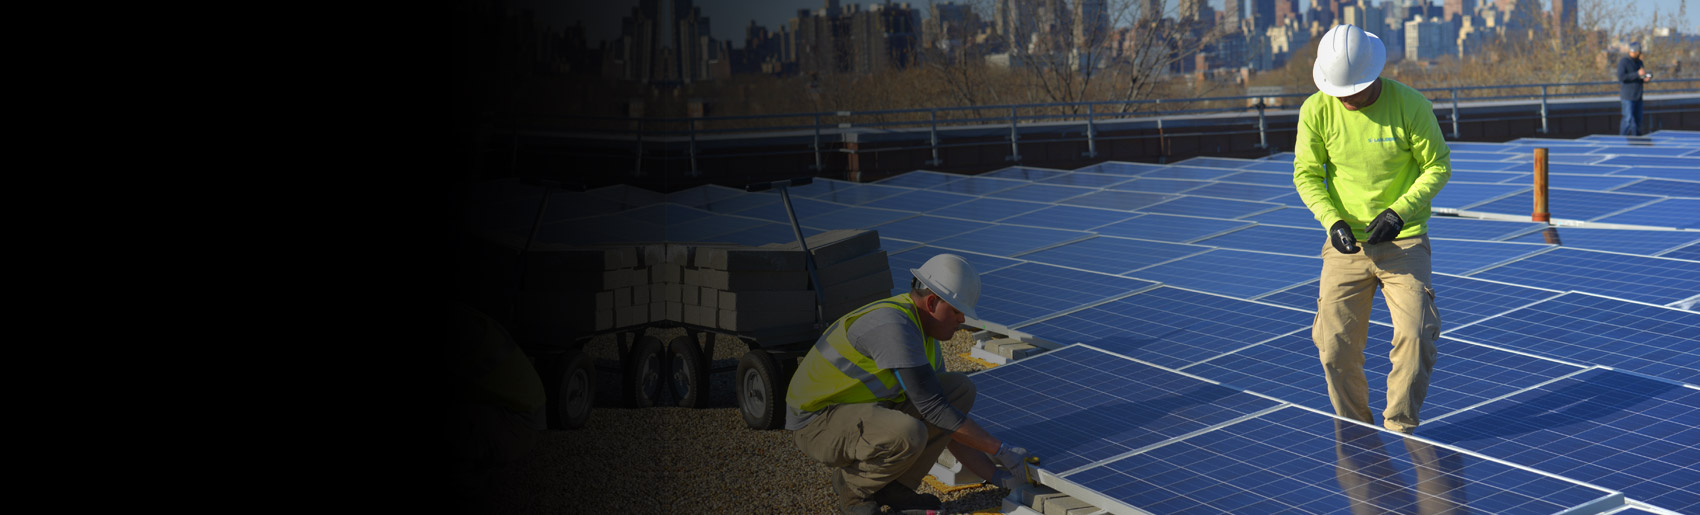 Solar panels are being installed on a rooftop in New York City